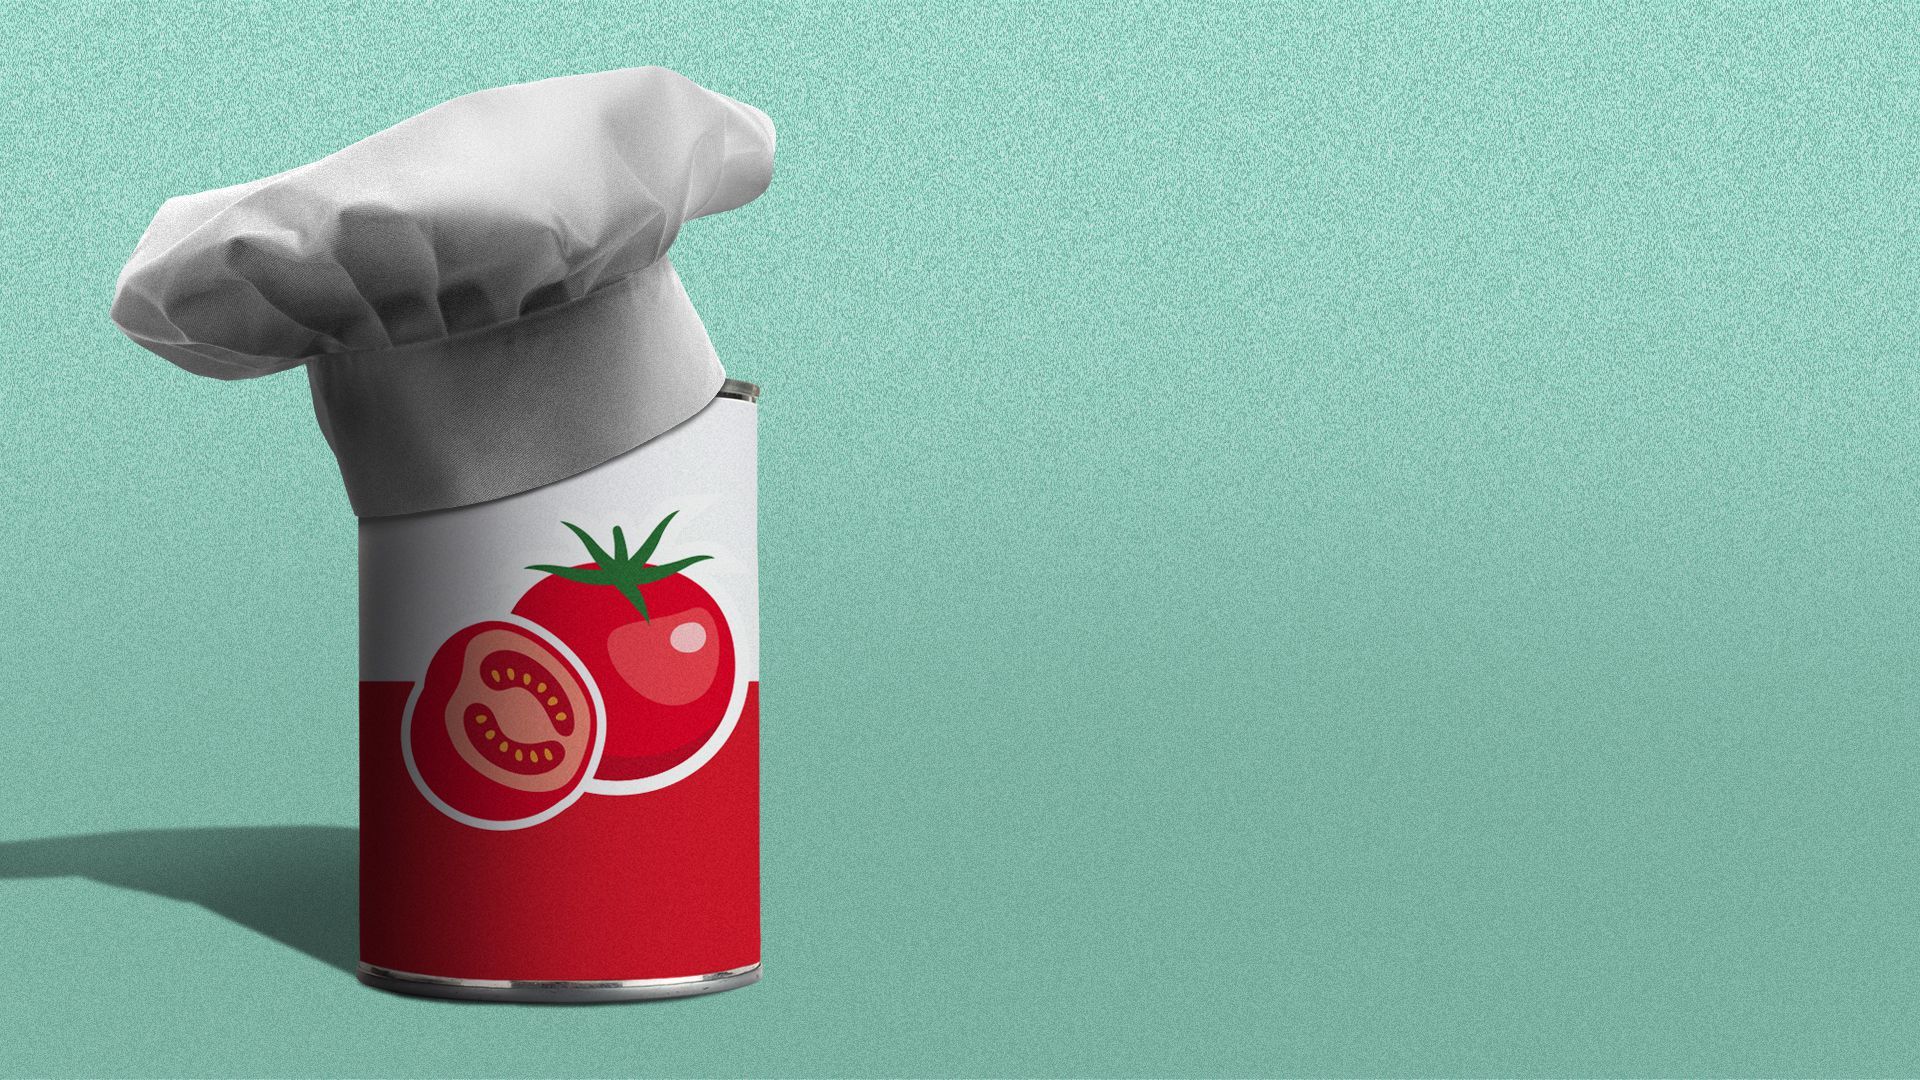 Illustration of a can of tomatoes wearing a chef's hat.